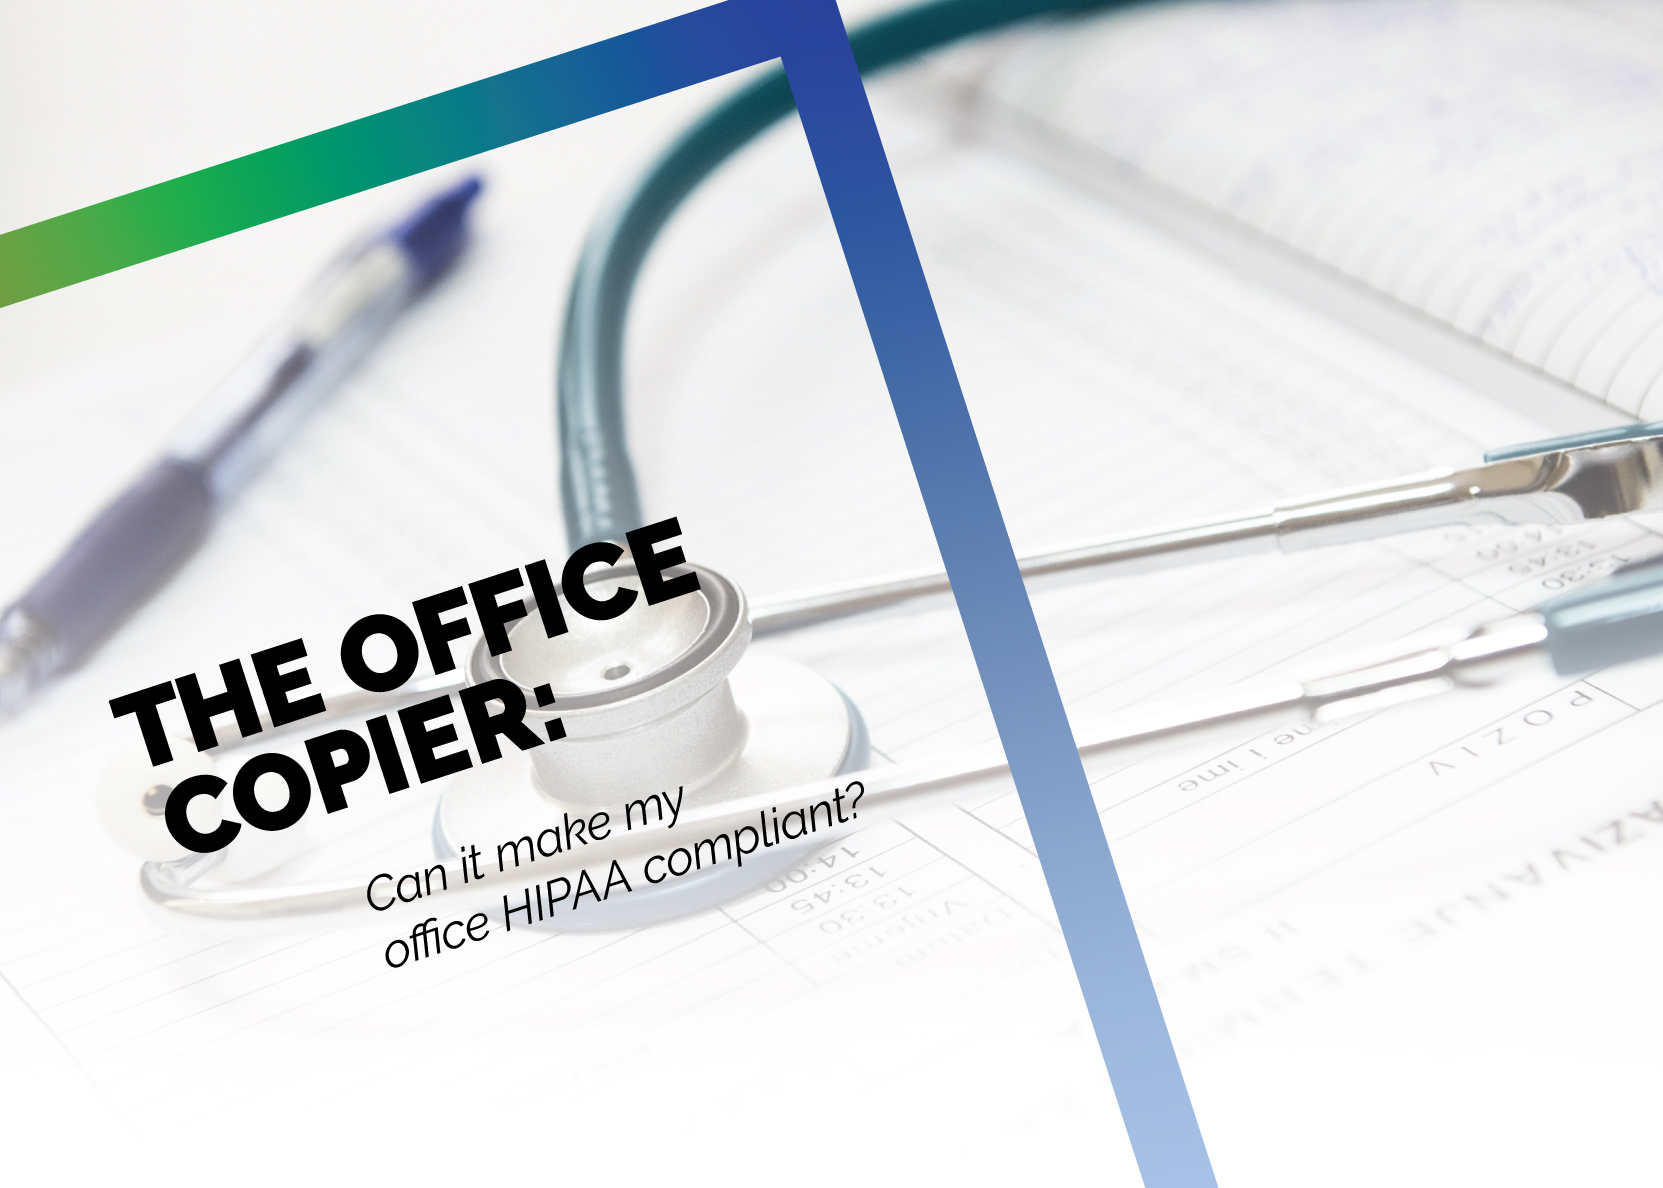 Can My Copier Make Our Office HIPAA Compliant?